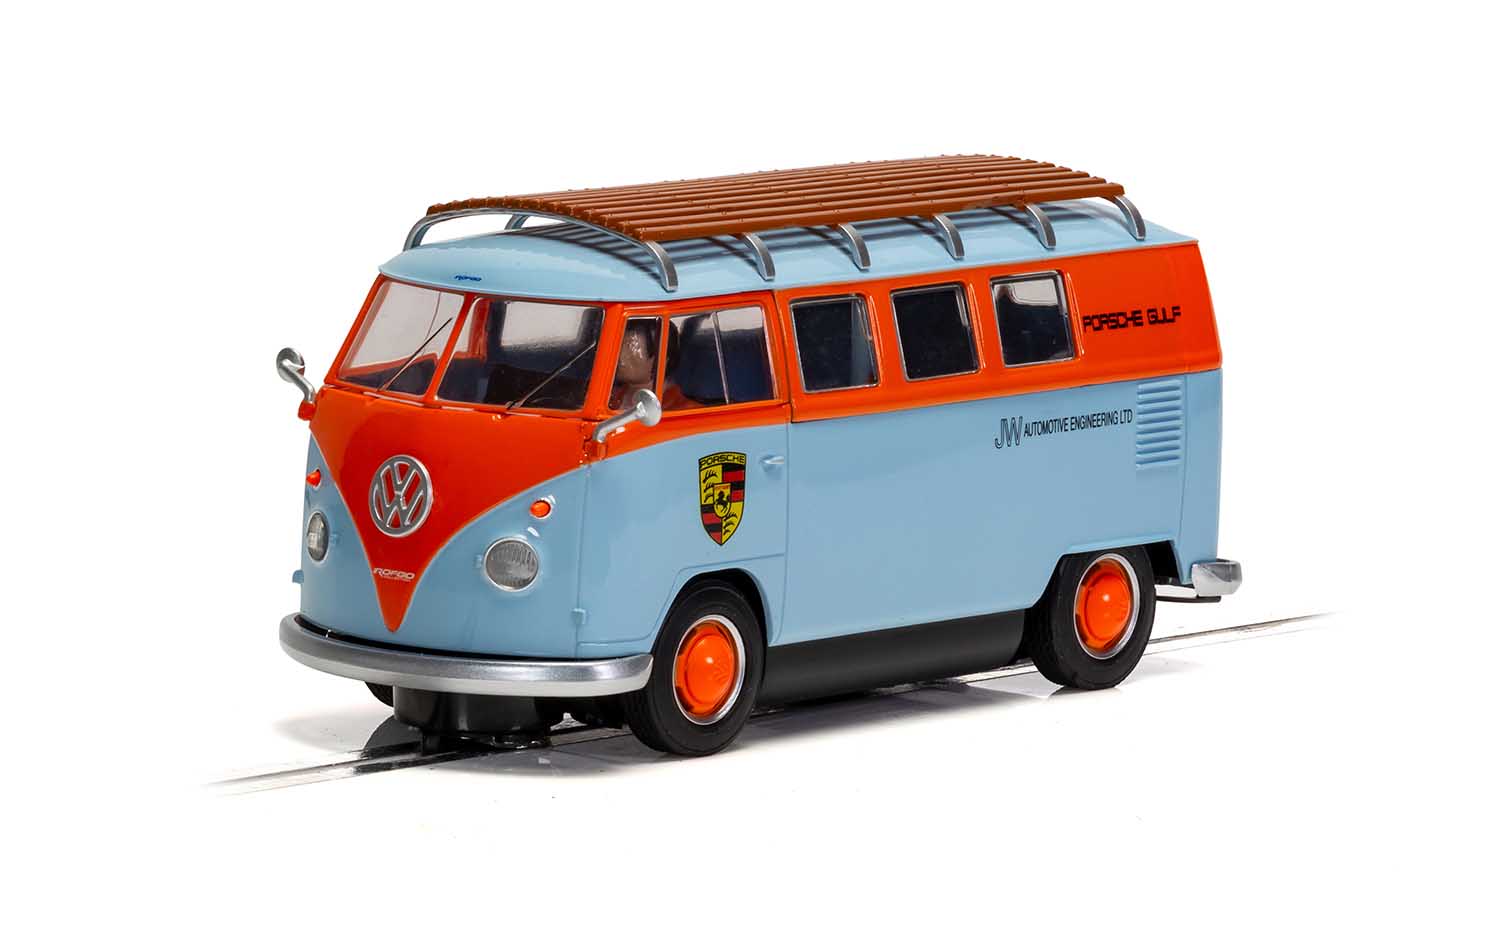 Superslot H4217 VW T1b Microbus - ROFGO Gulf Collection